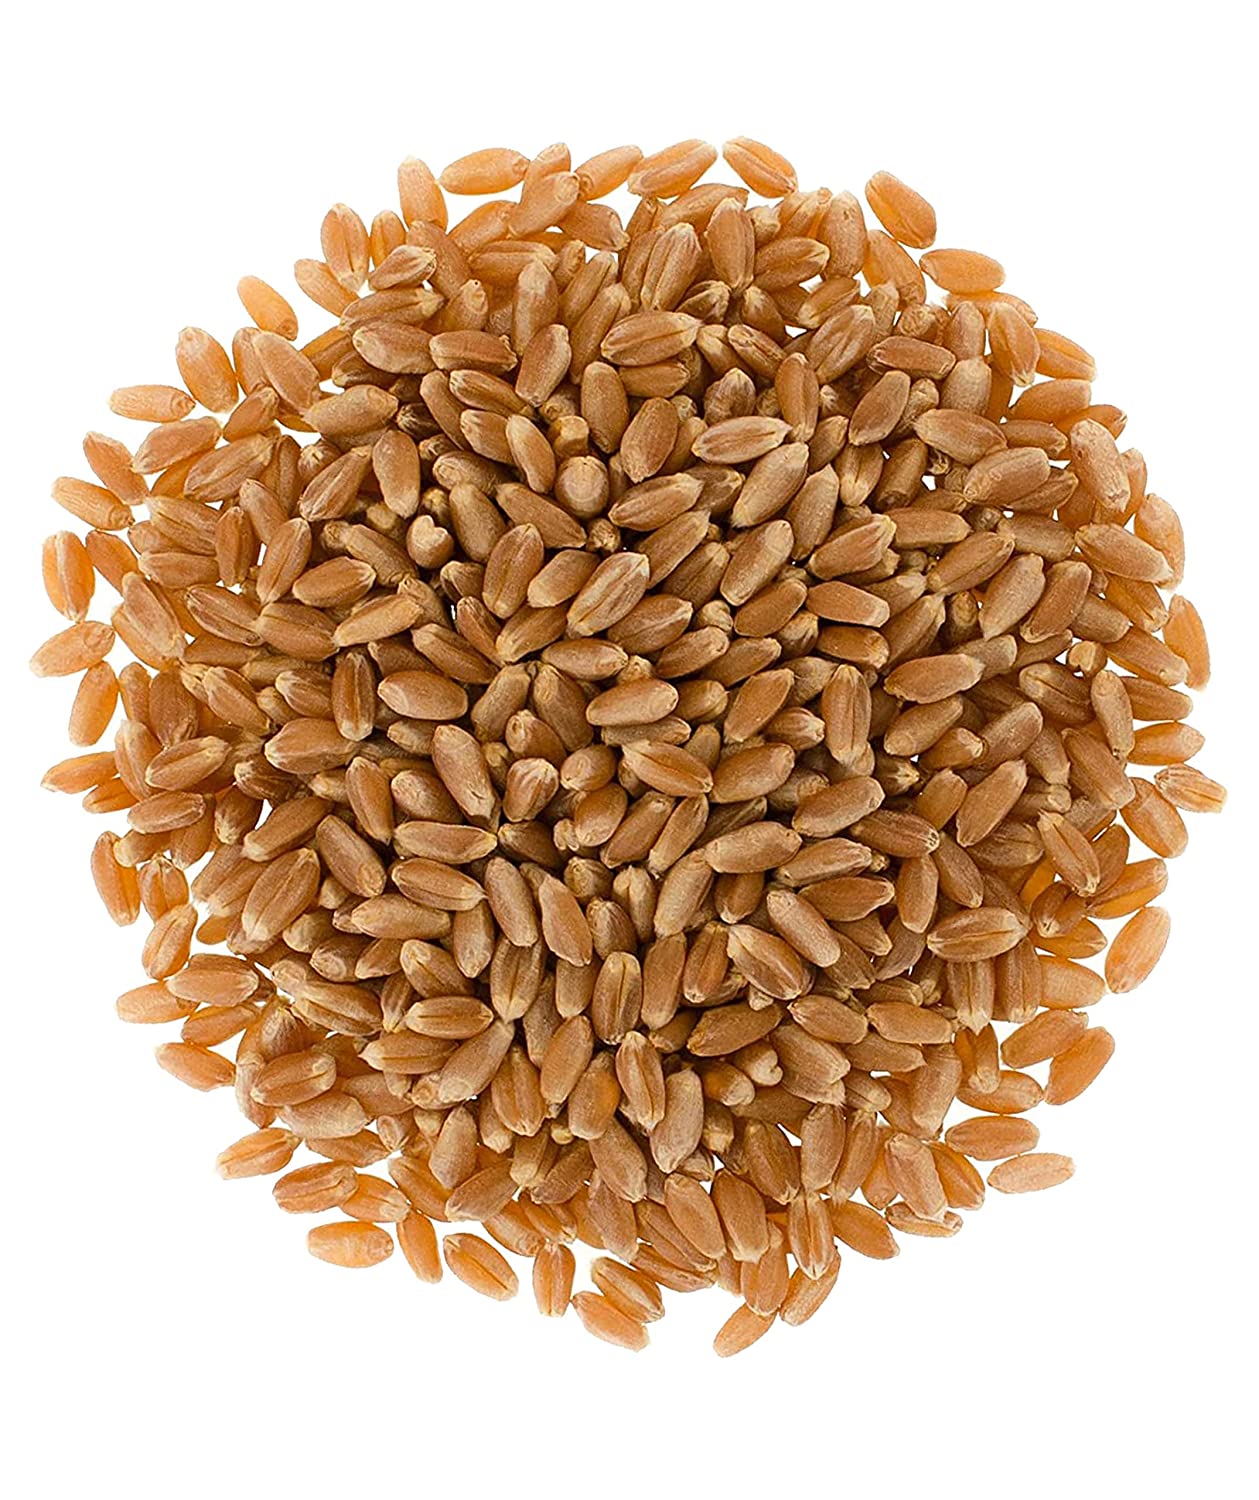 Hard Red Winter Wheat Berries | Family Farmed in Washington State | Non-GMO Project Verified | 5 LBS | 100% Non-Irradiated | Certified Kosher Parve | Field Traced | Burlap Bag